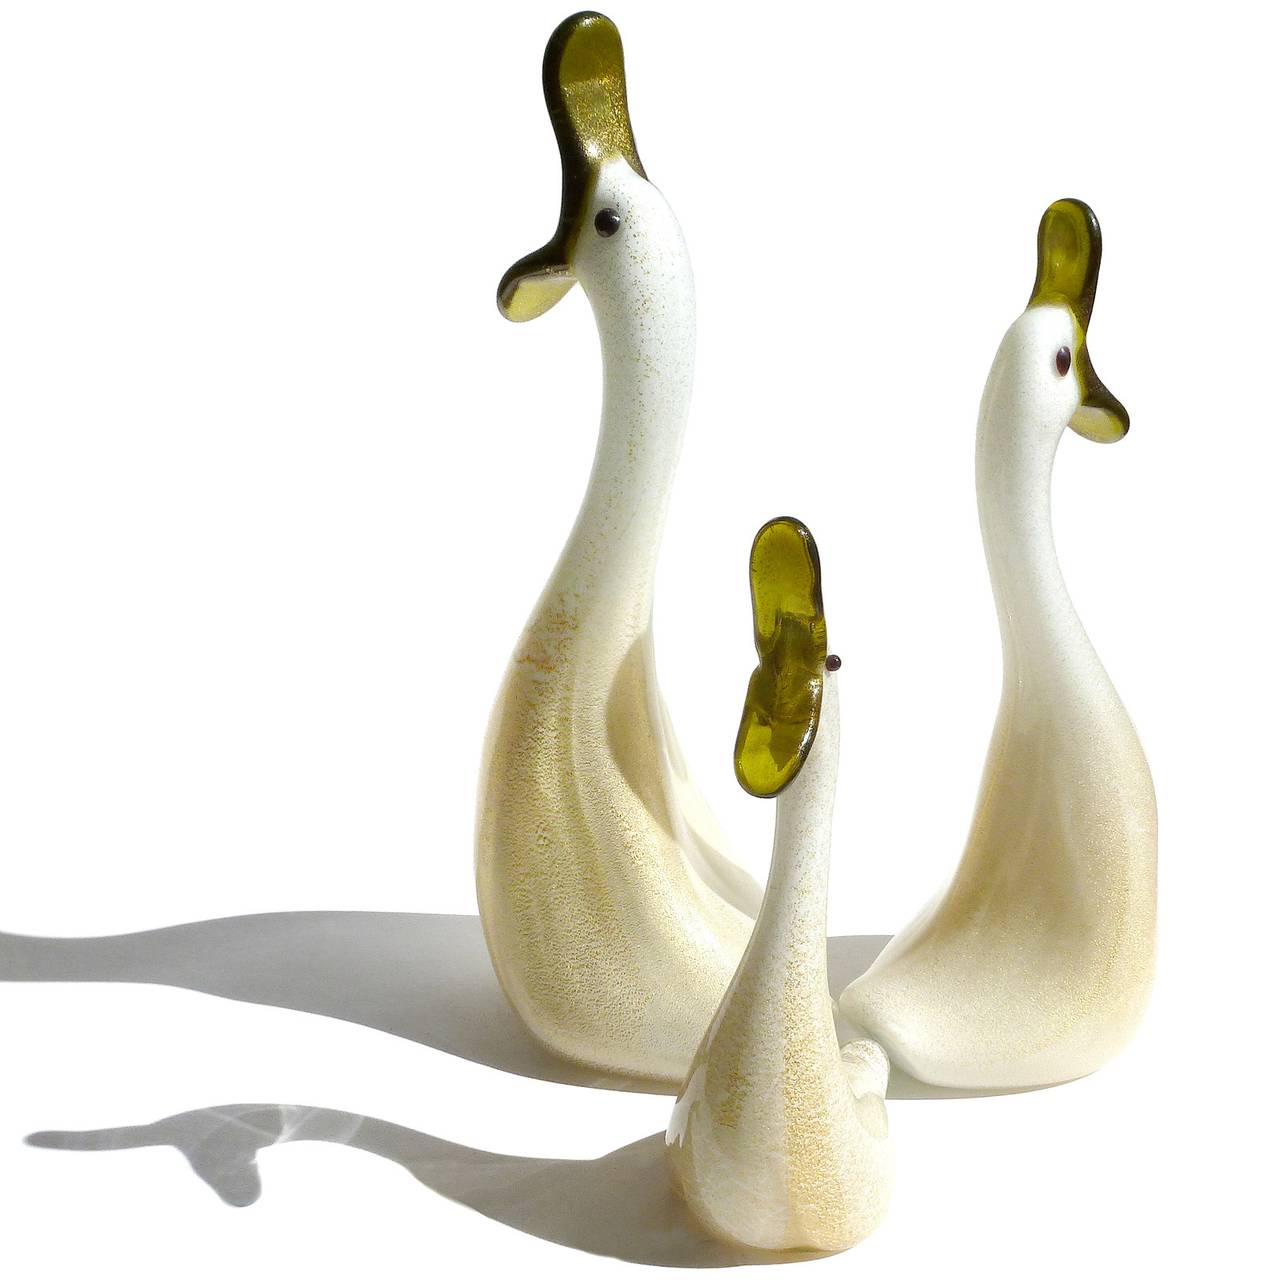 Adorable vintage Murano hand blown white and gold flecks Italian art glass duck family figurines / sculptures. These cute birds just make me laugh every time I look at them. Can you just imagine the choir of voices coming out of those beaks! Dad,